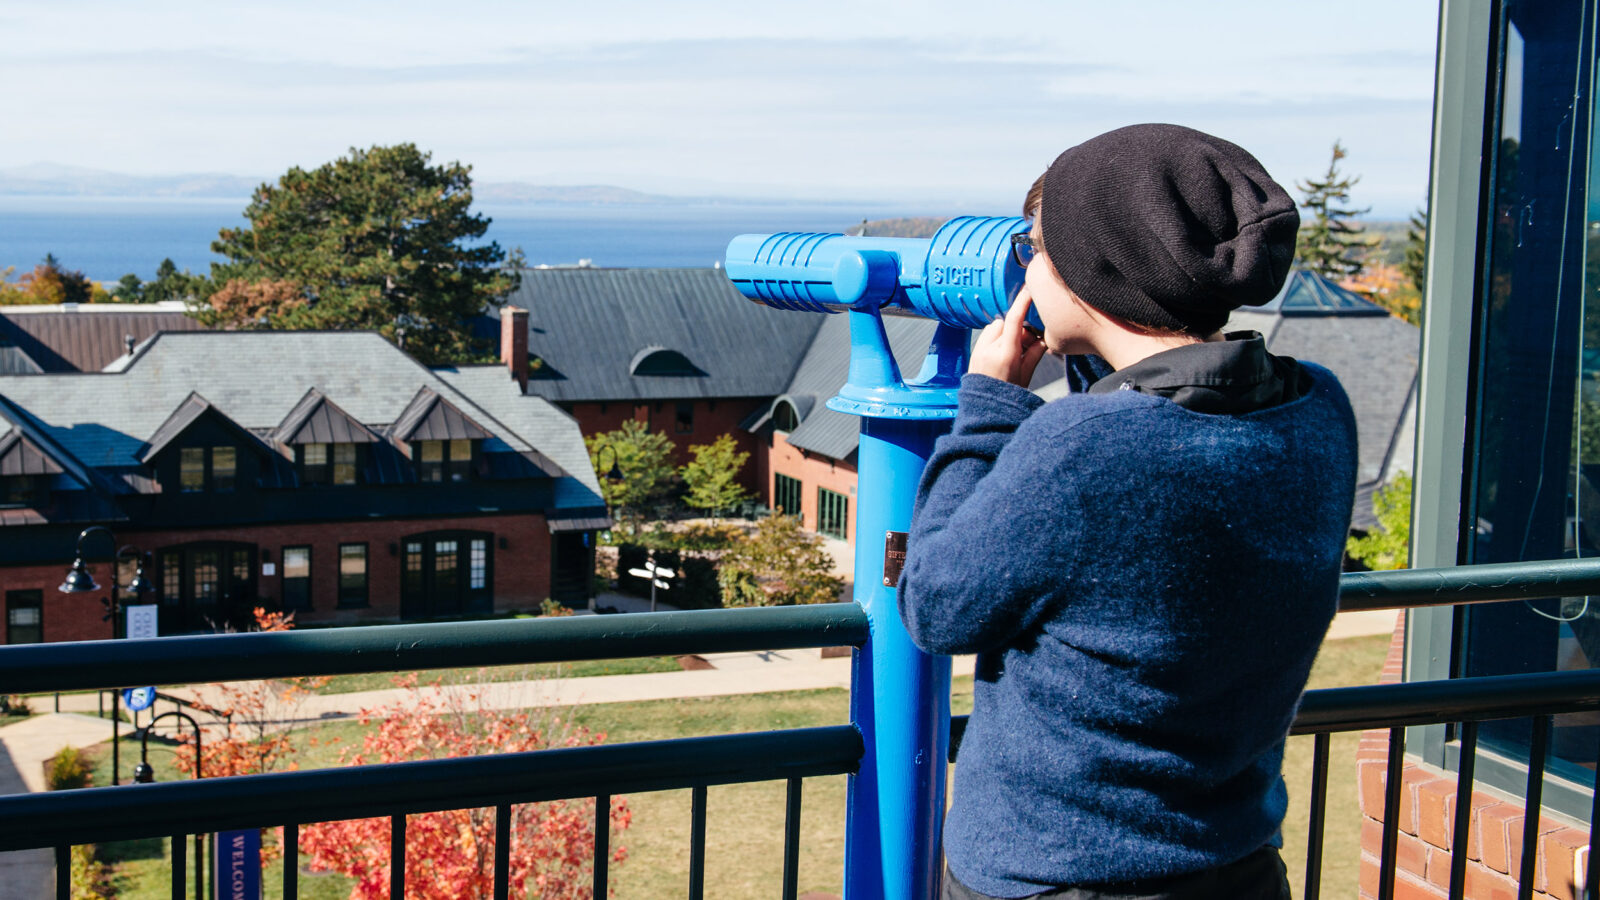 students looks through the telescope on a balcony to view Lake Champlain